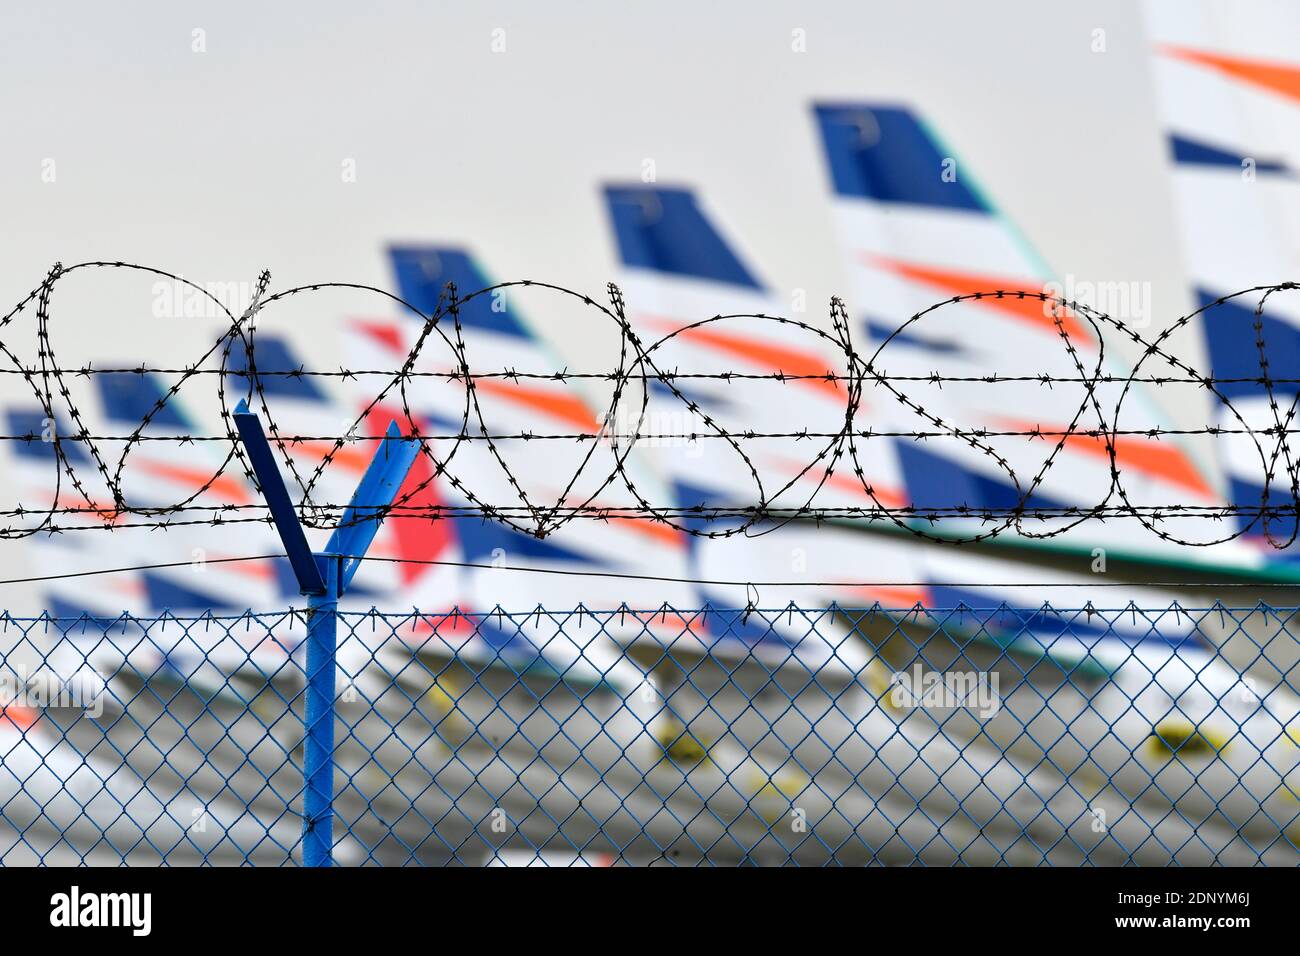 grounded planes behind the barbed wire during Covid-19 pandemy Stock Photo